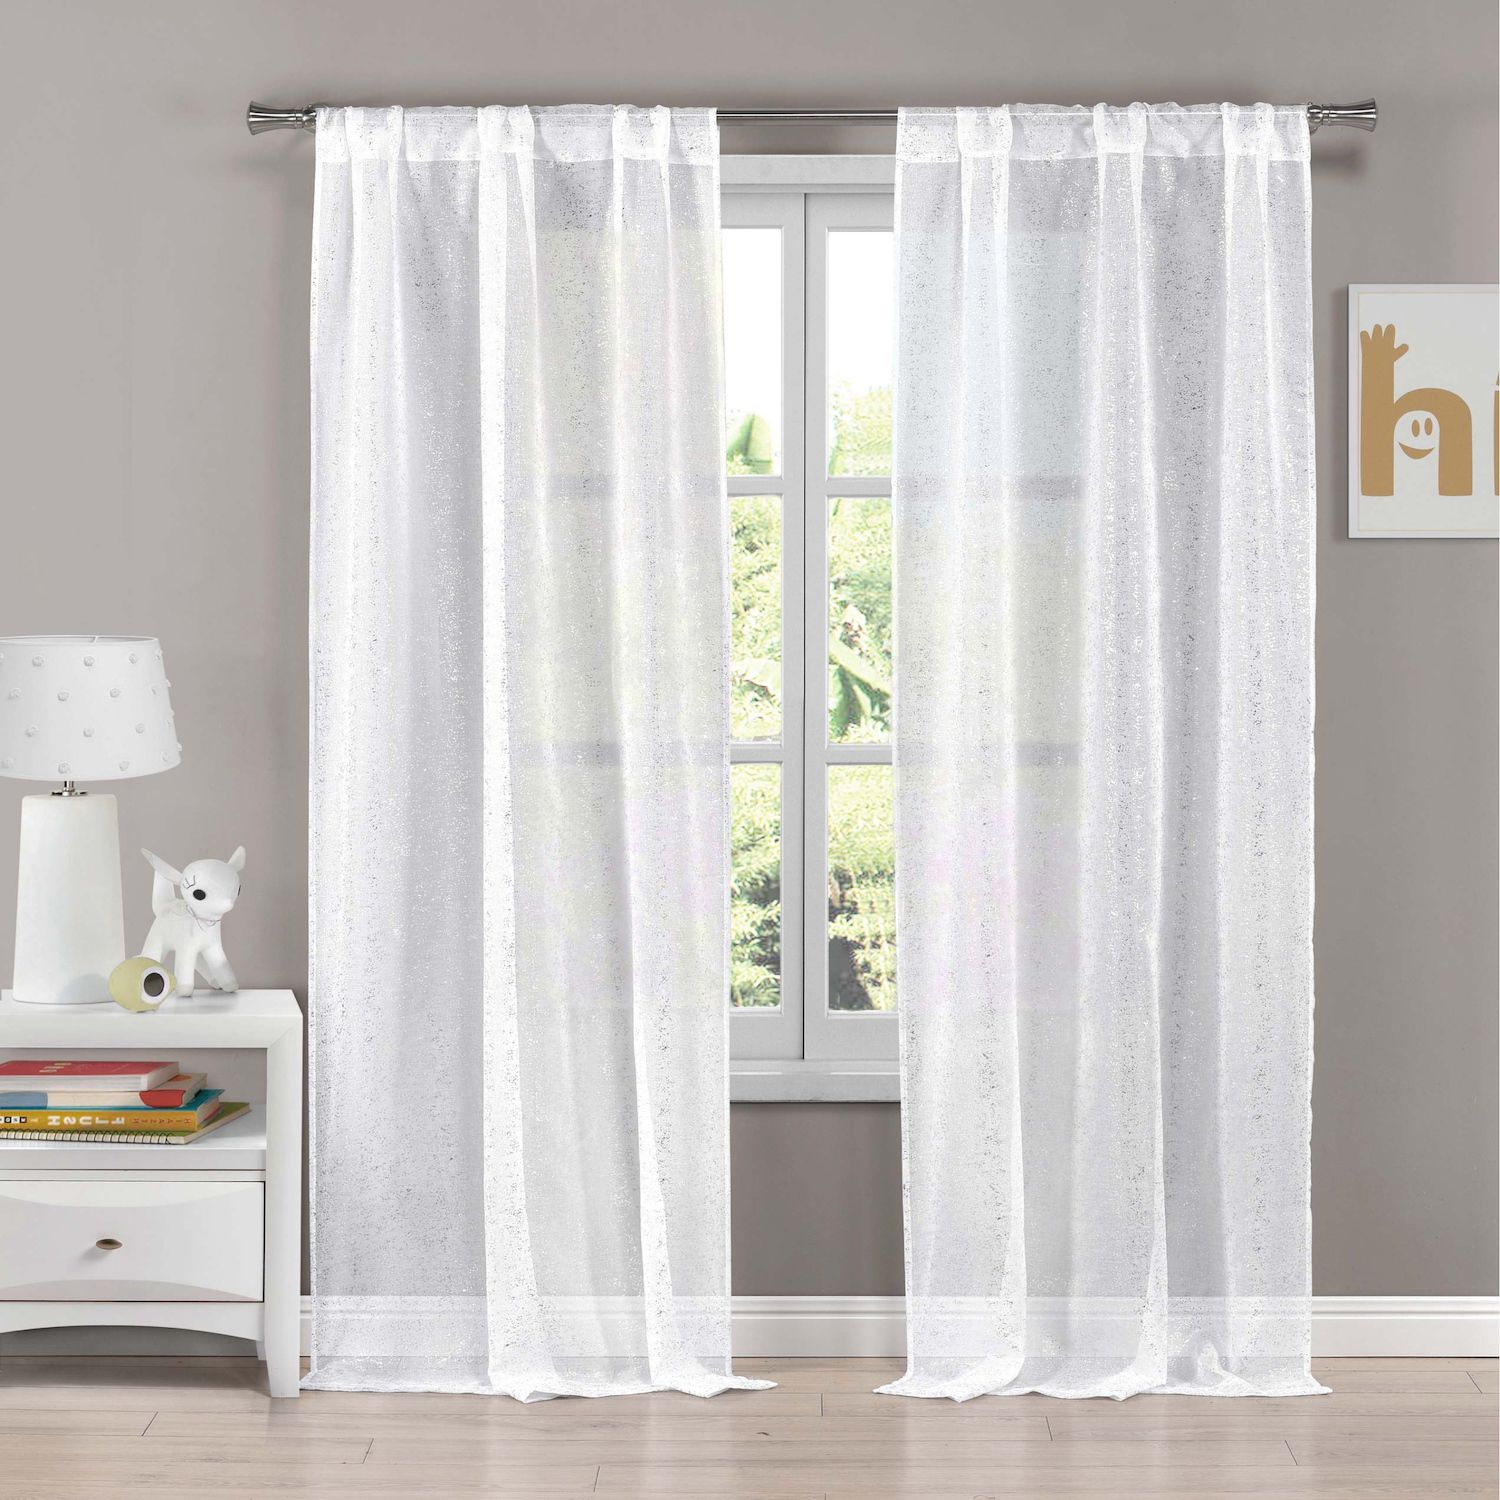 Image for Duck River Textile Molly Solid 2-pack Window Curtain Set at Kohl's.